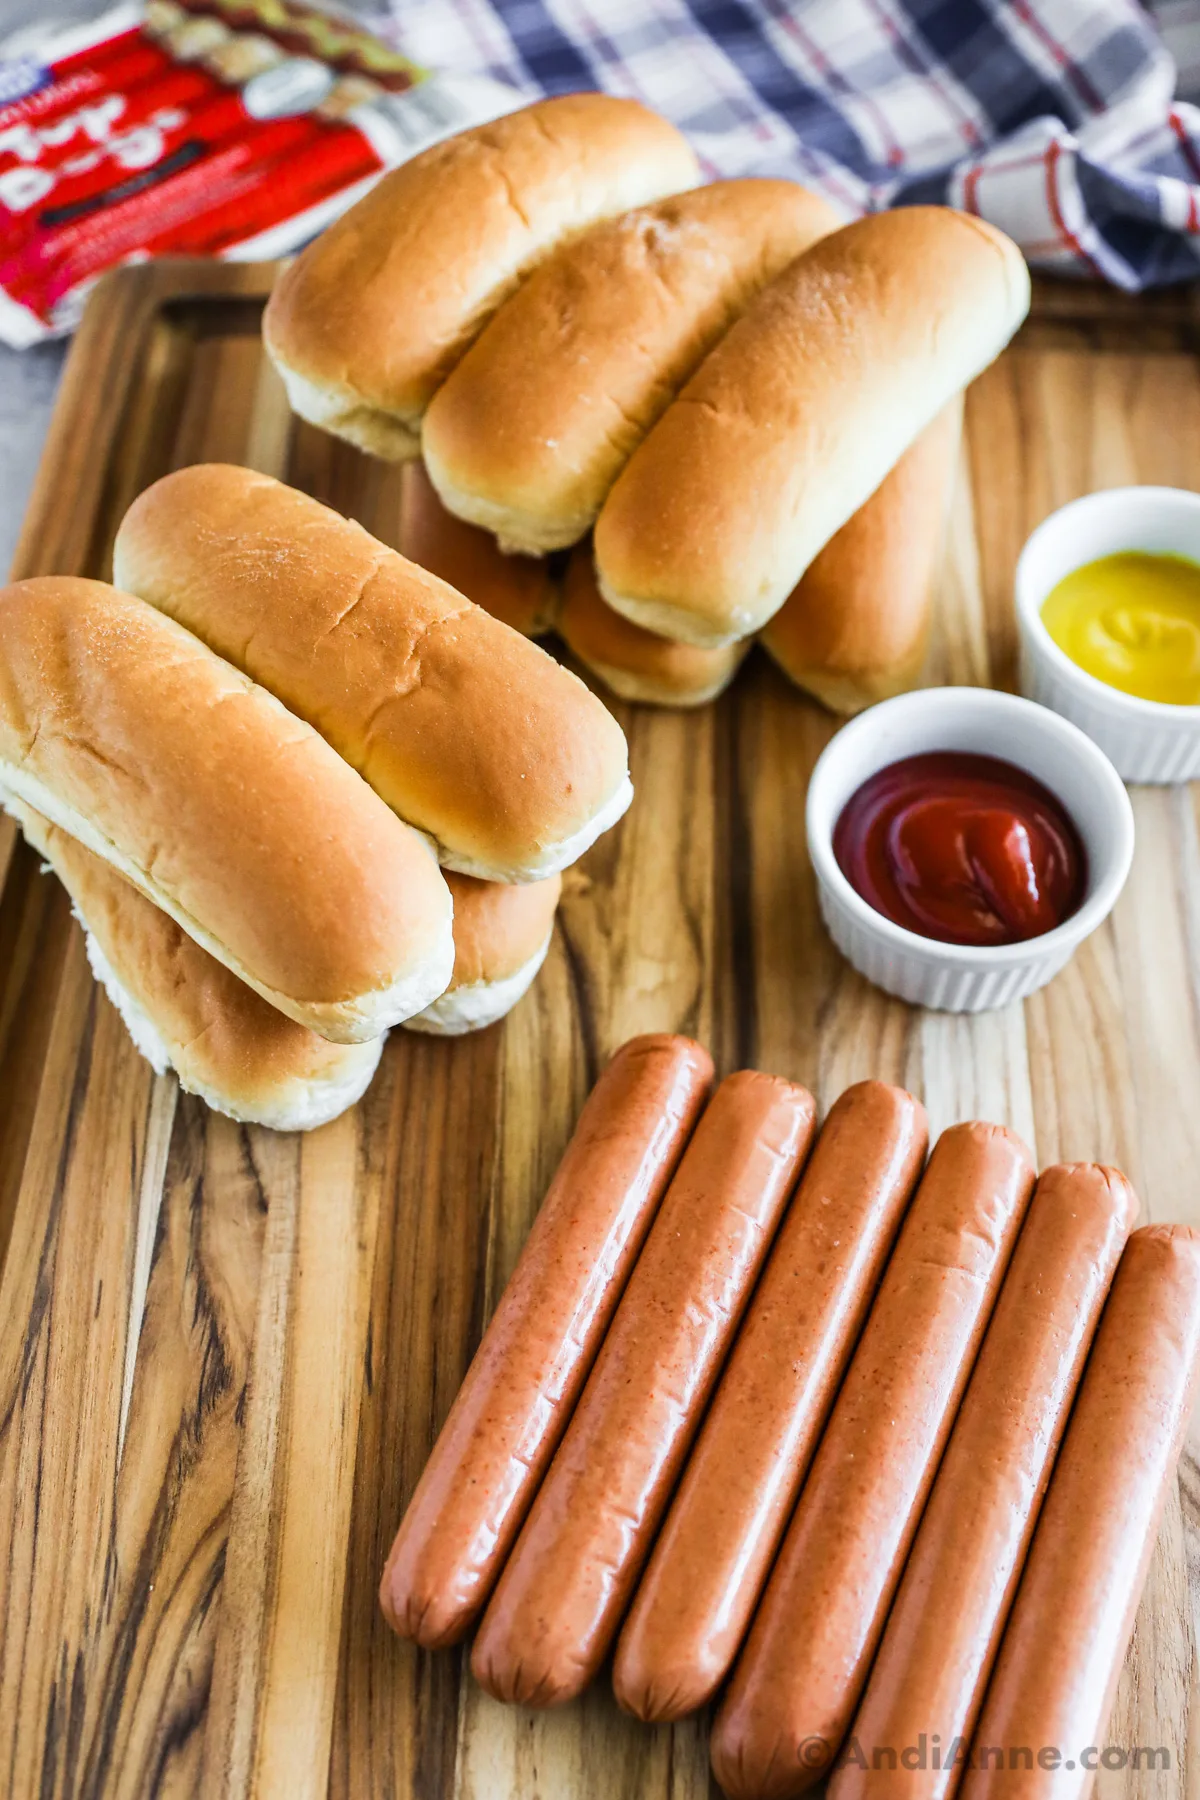 A stack of buns, hot dogs and small bowls of ketchup and mustard.